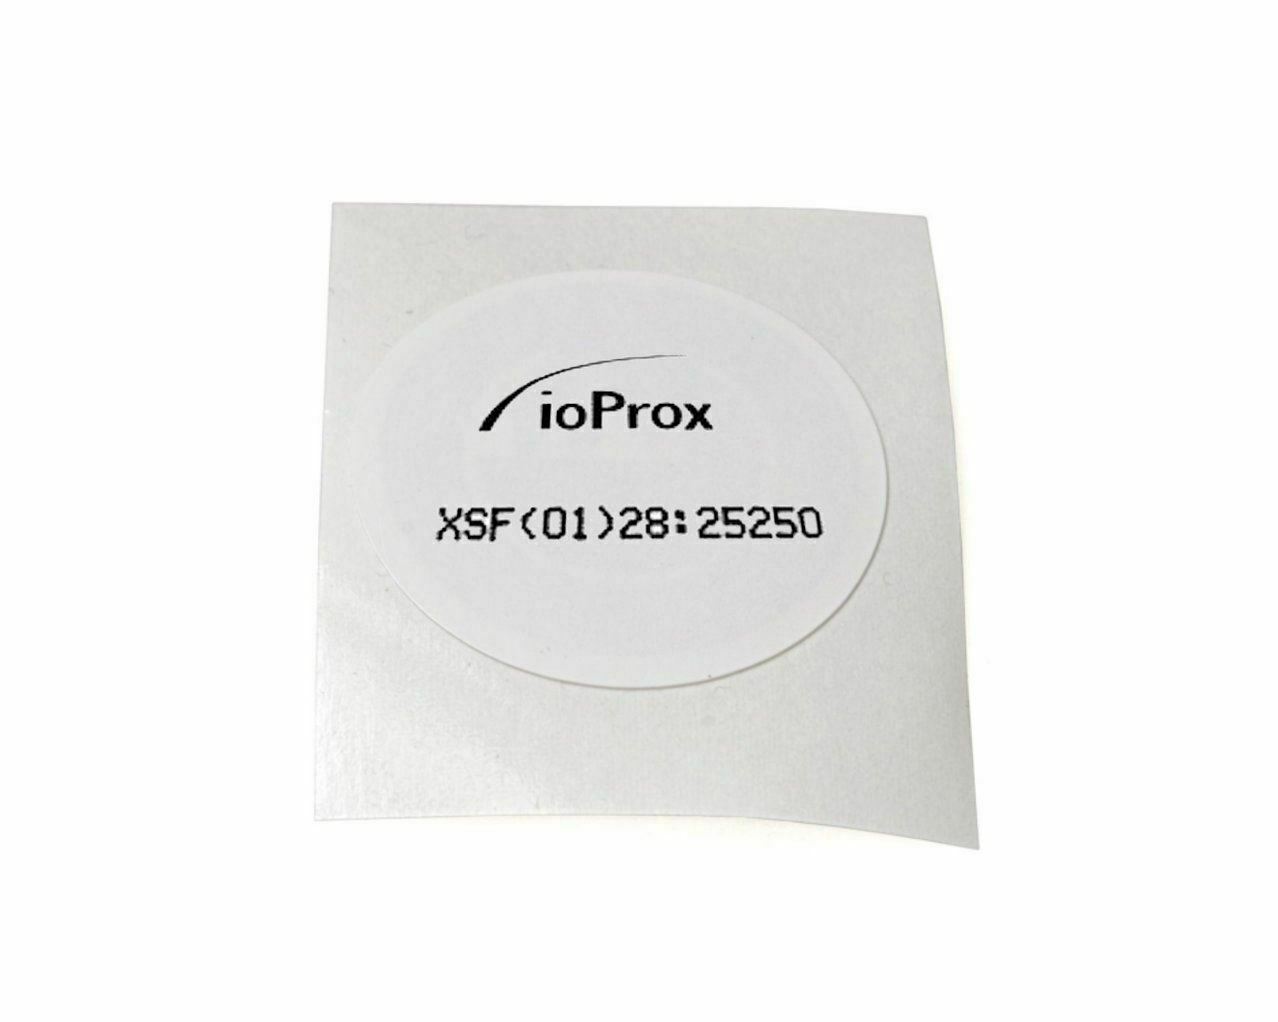 Kantech ioProx 26bit Wiegand Self-Adhesive Sticker, P50TAG - Pack of 50